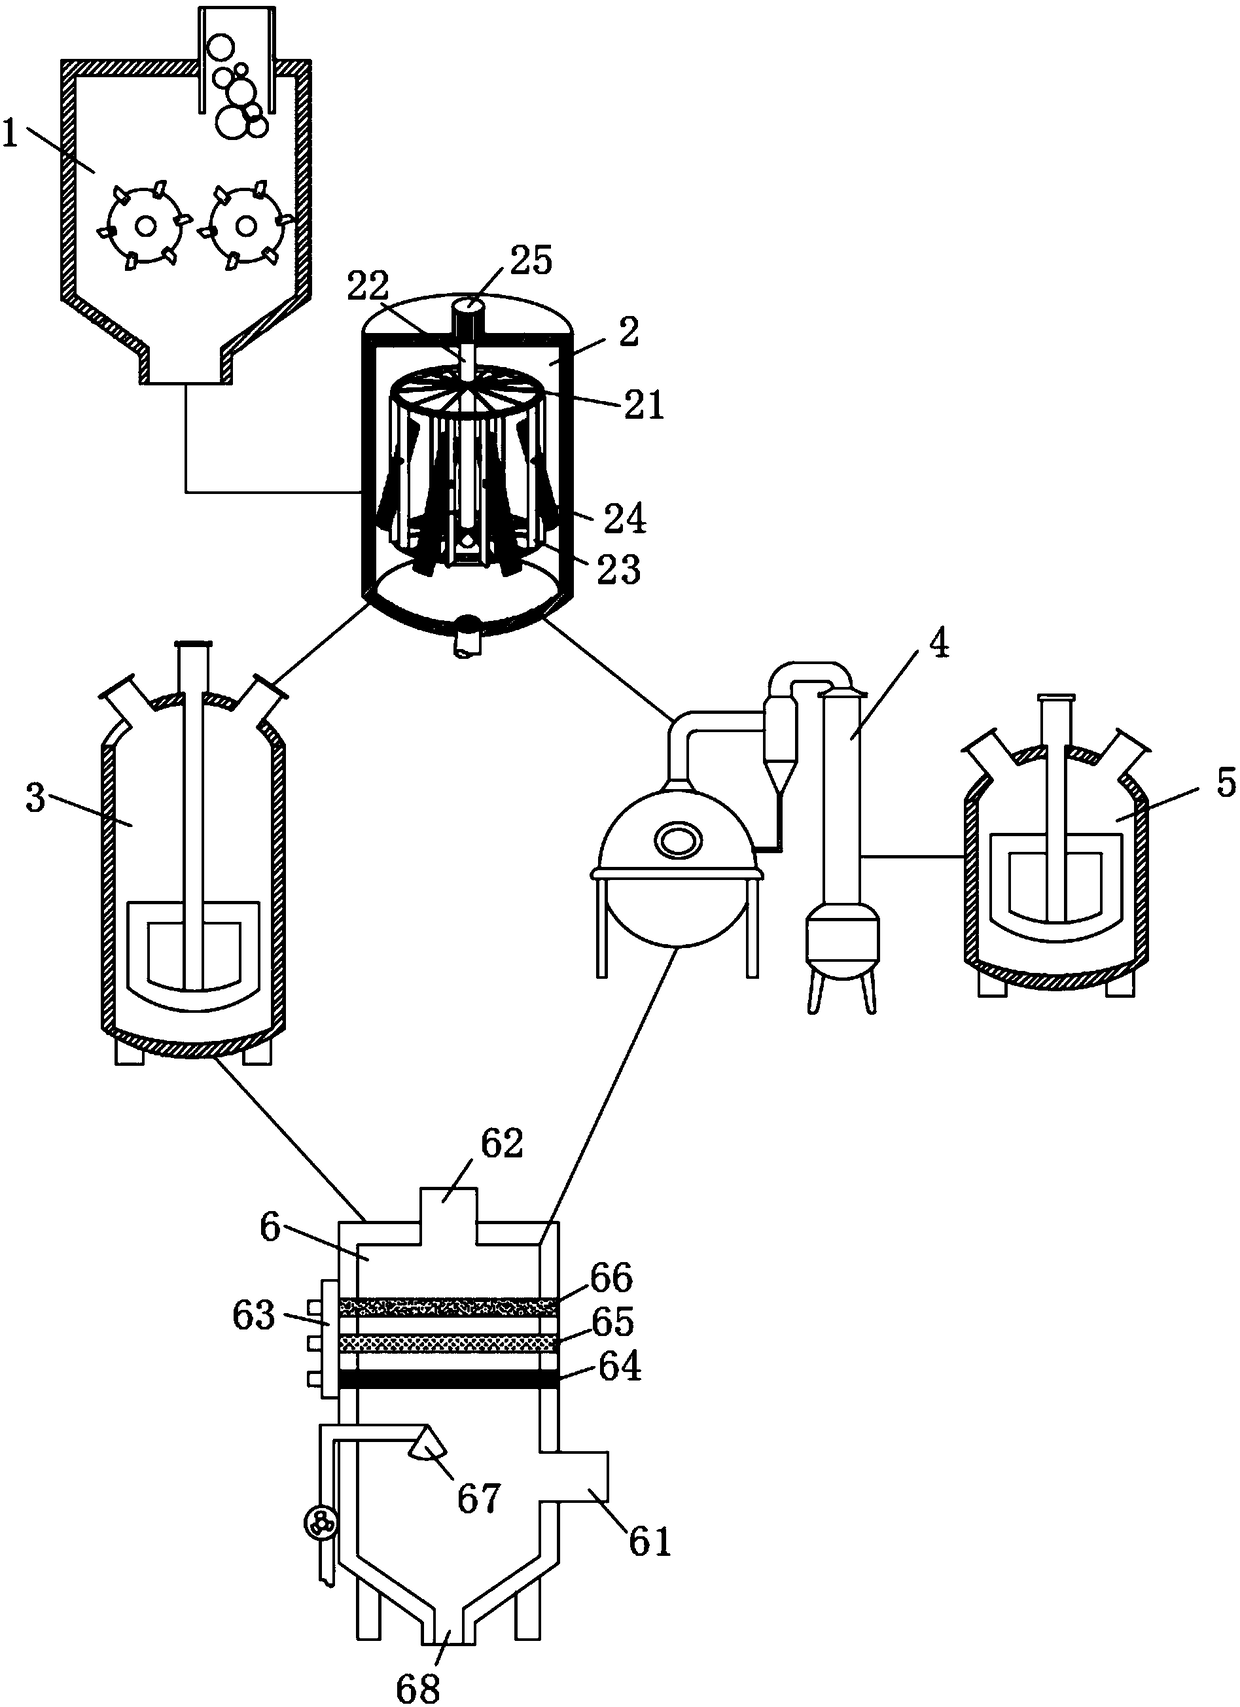 Environmental protection treatment equipment and method for improving rural ecological environment